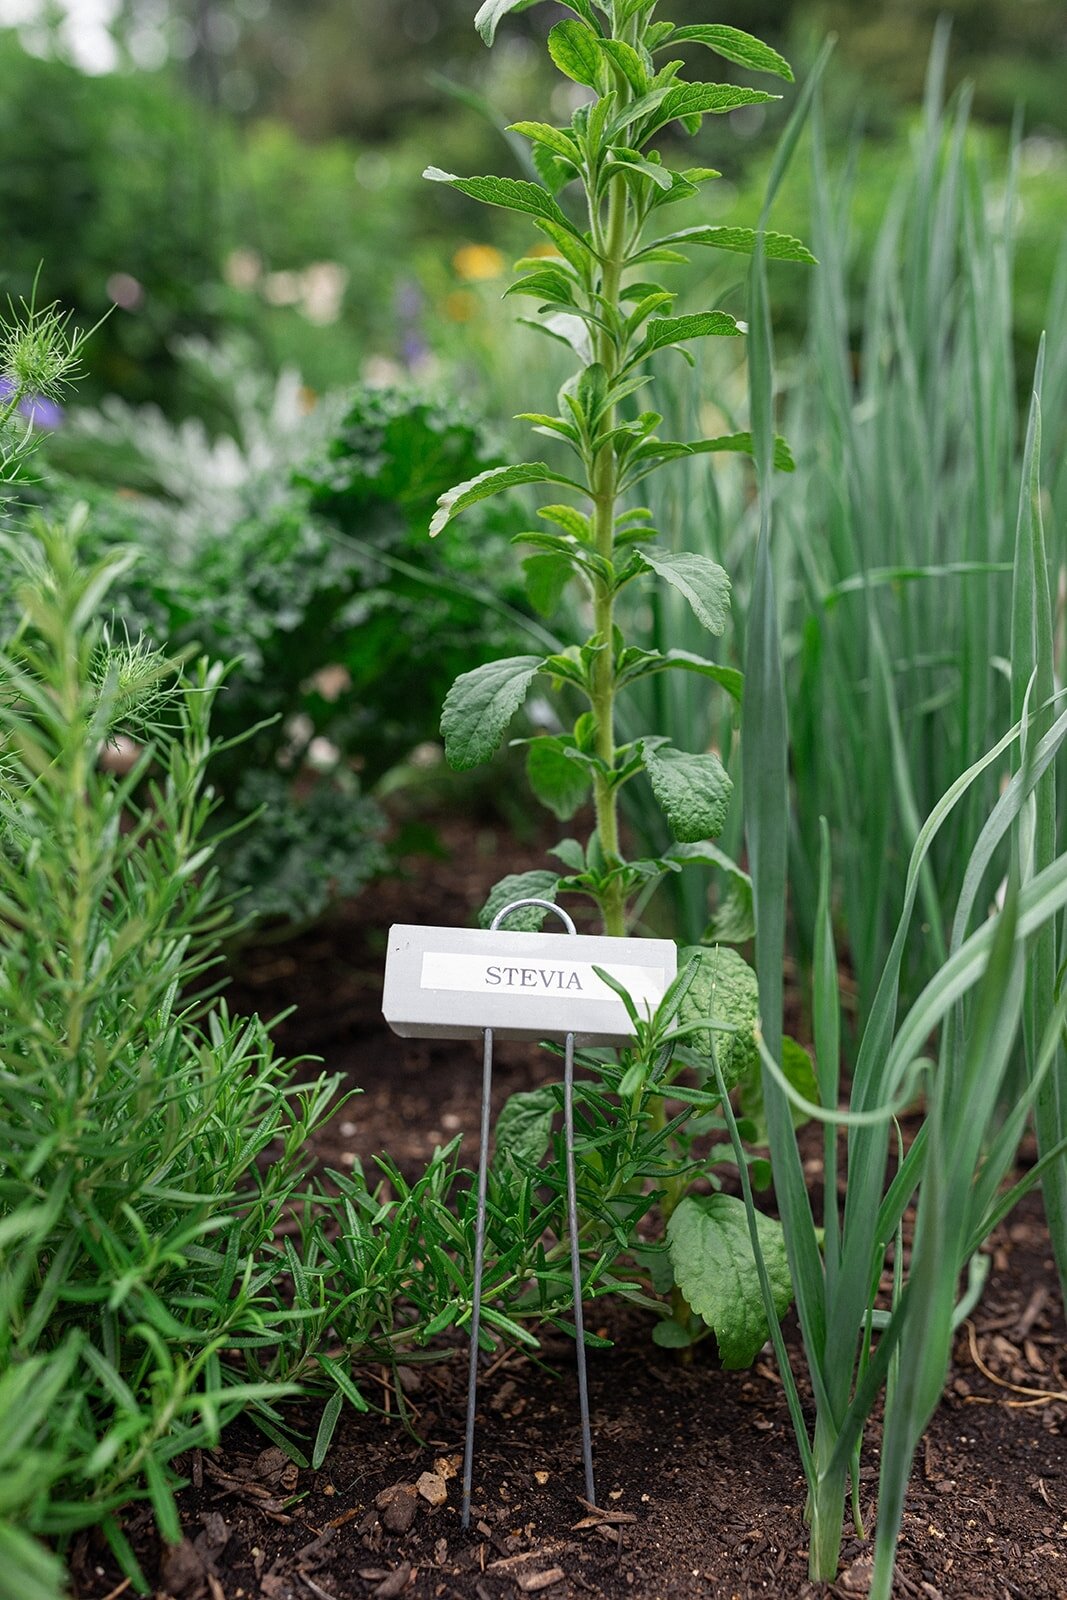 How many of you grow stevia? 

I've been working on my planting plan, deciding whether my new corten beds should be a tea garden. Stevia is an herb in the Asteraceae family, and I think it is worth highlighting.

It's a pretty plant in the garden, an